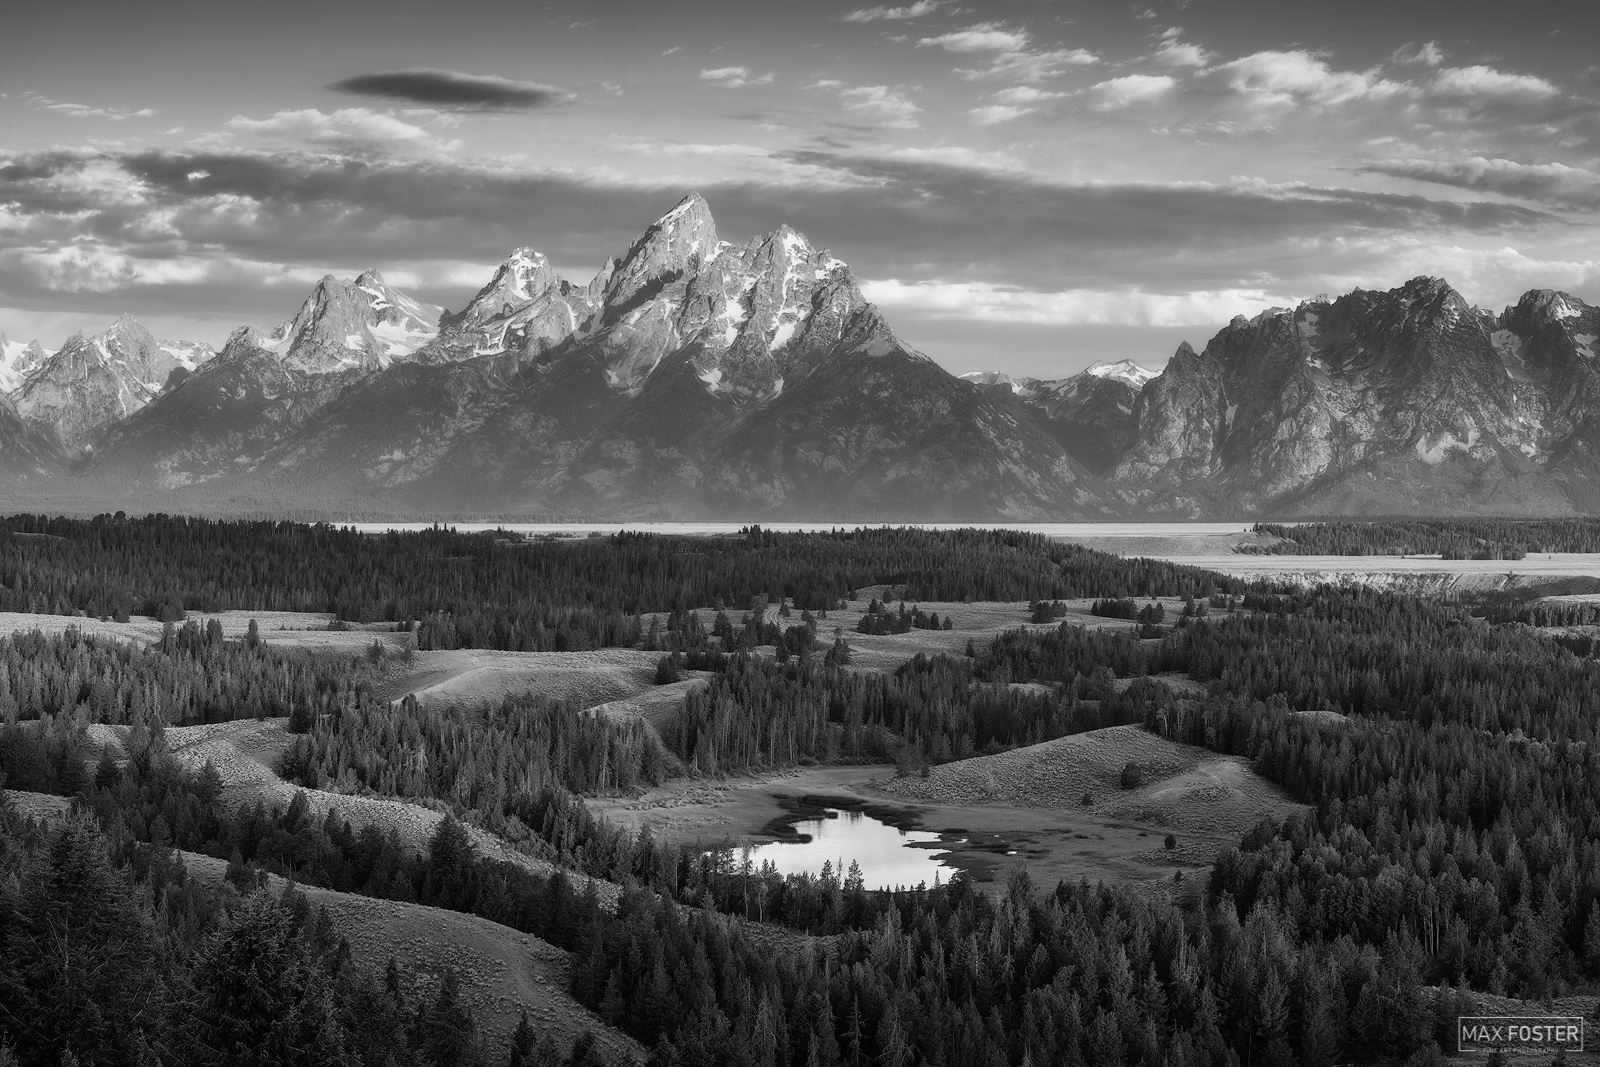 Refresh your space with A Grand Morning Monochrome, Max Foster's limited edition photography print of Grand Teton National Park...